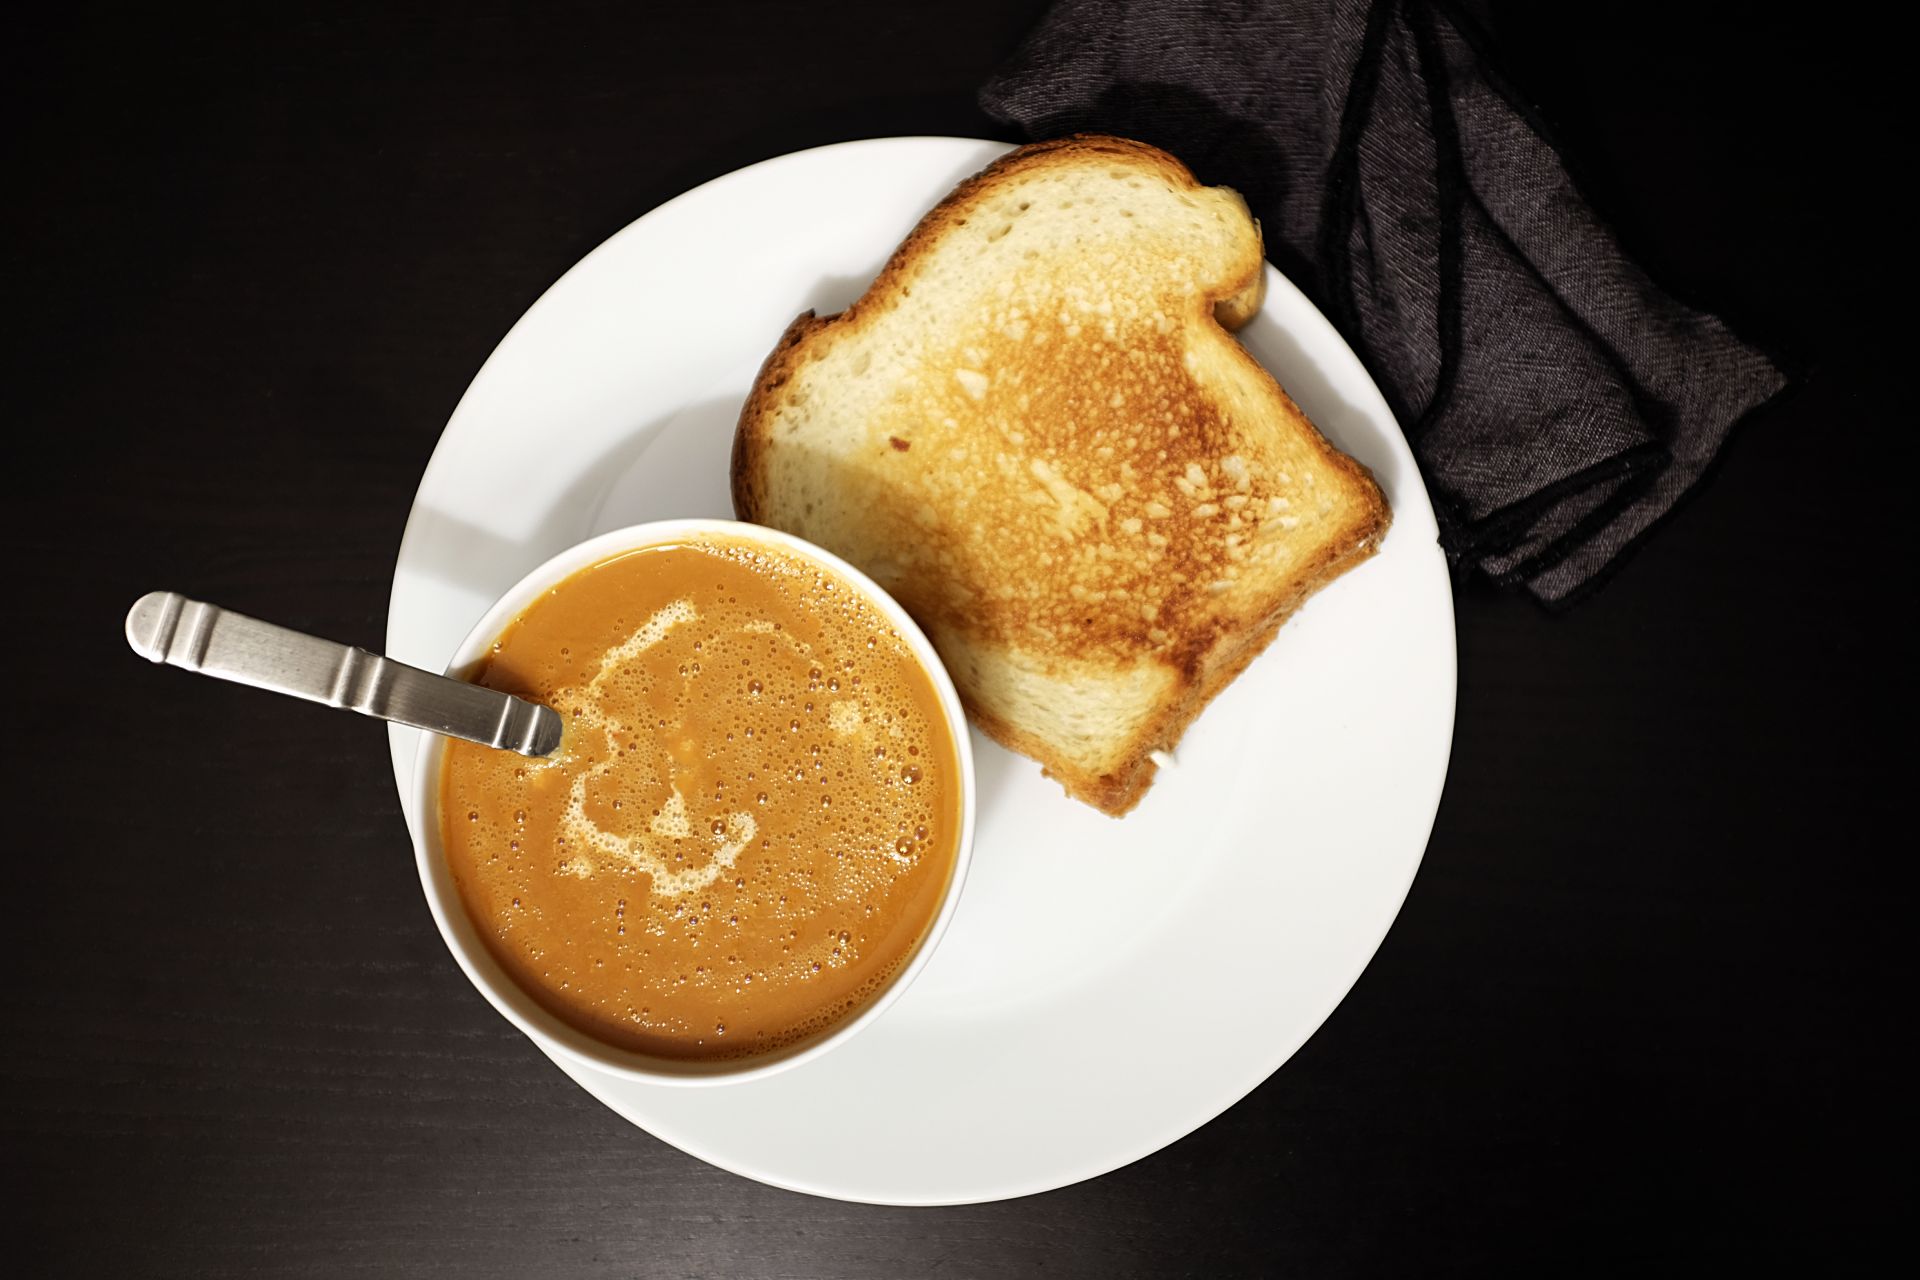 A white plate with a bowl of tomato soup and a grilled cheese sandwich